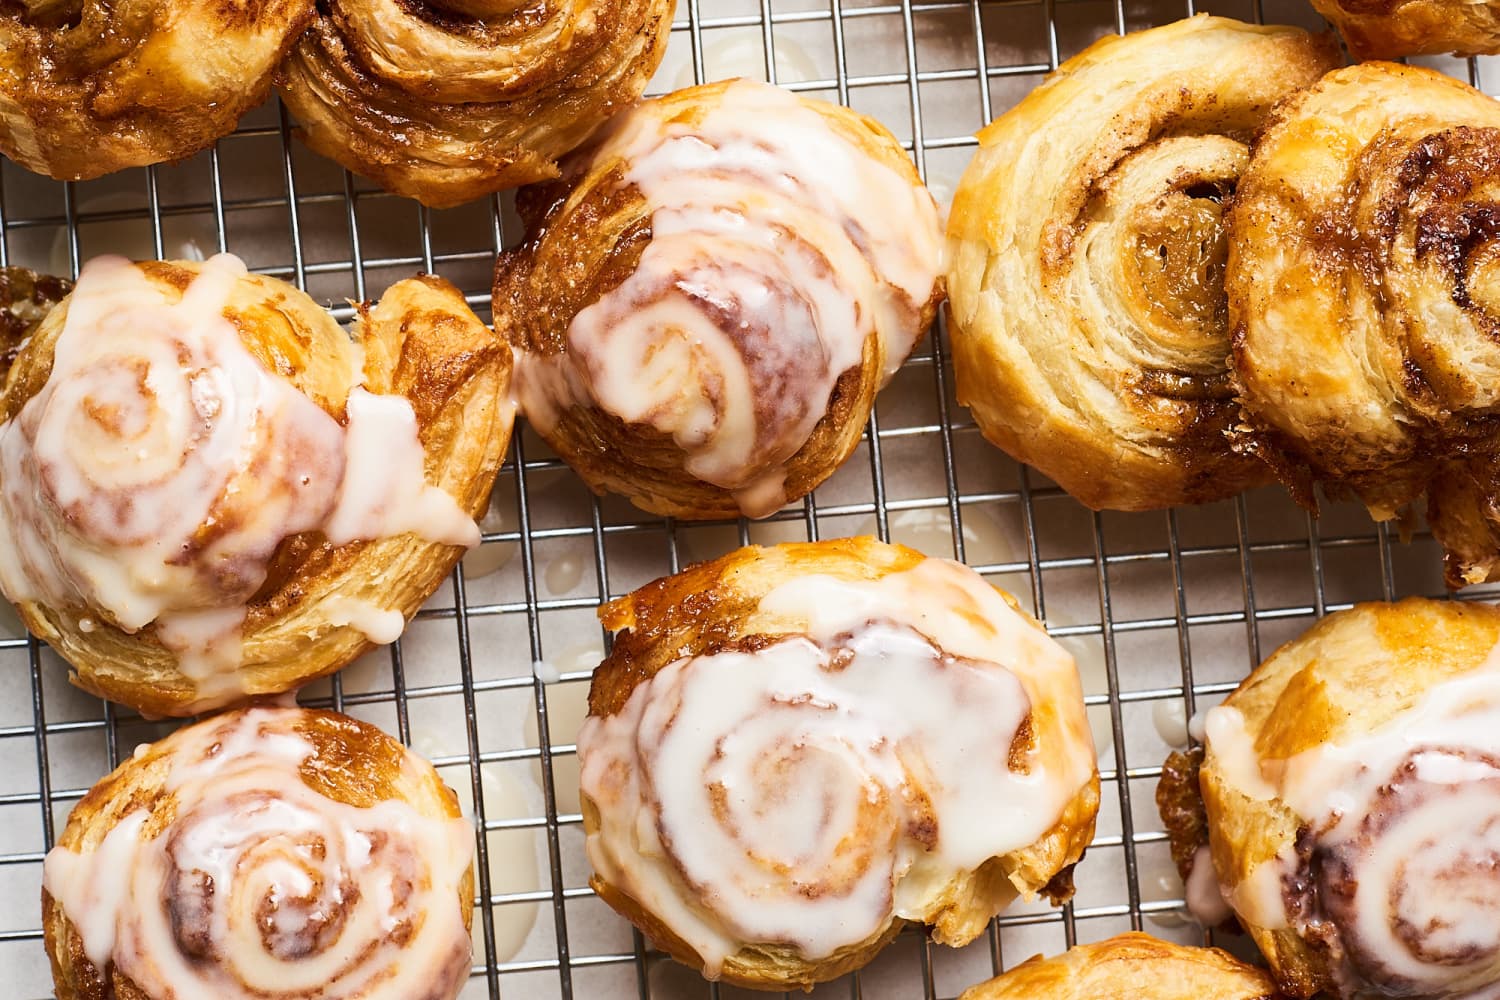 This Amish Bakery Has the Largest Cinnamon Rolls in all of New Jersey